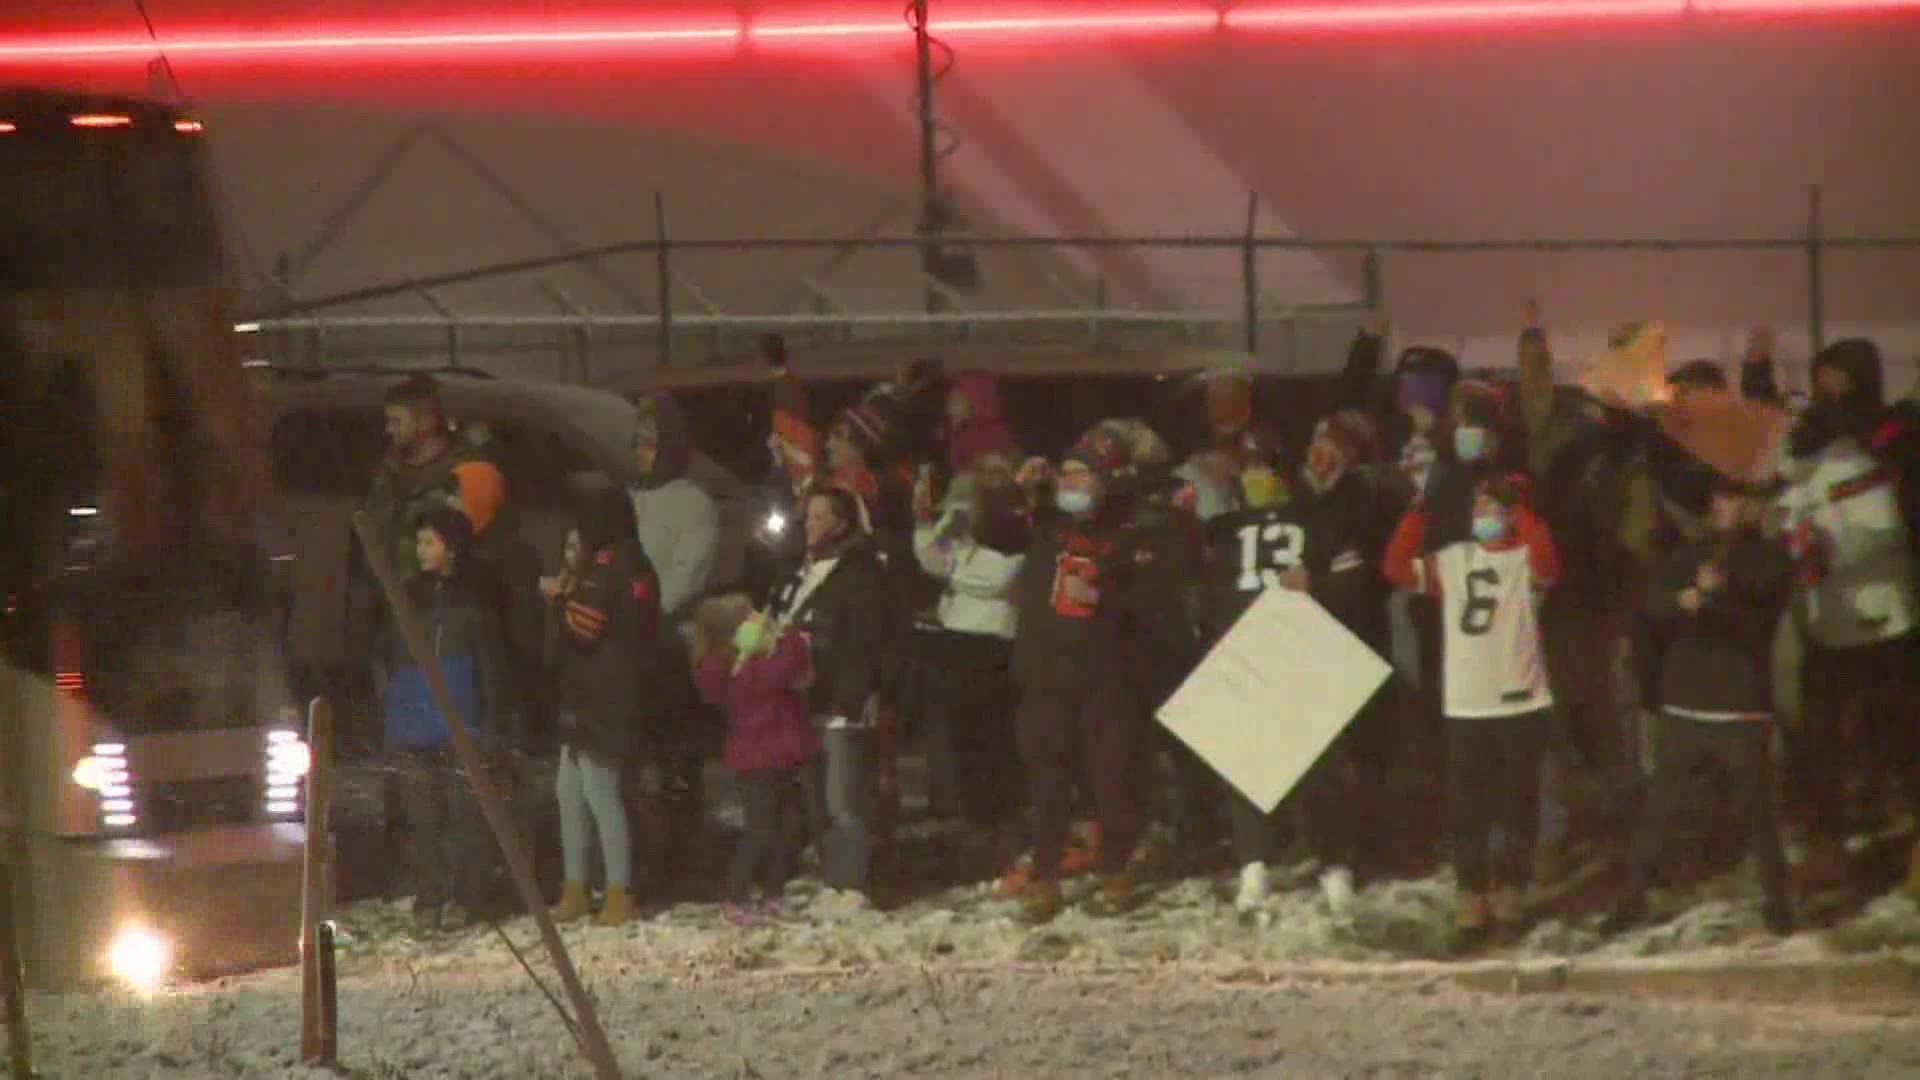 This is how Cleveland Browns fans welcomed the team home after their incredible season despite the loss to the Kansas City Chiefs.